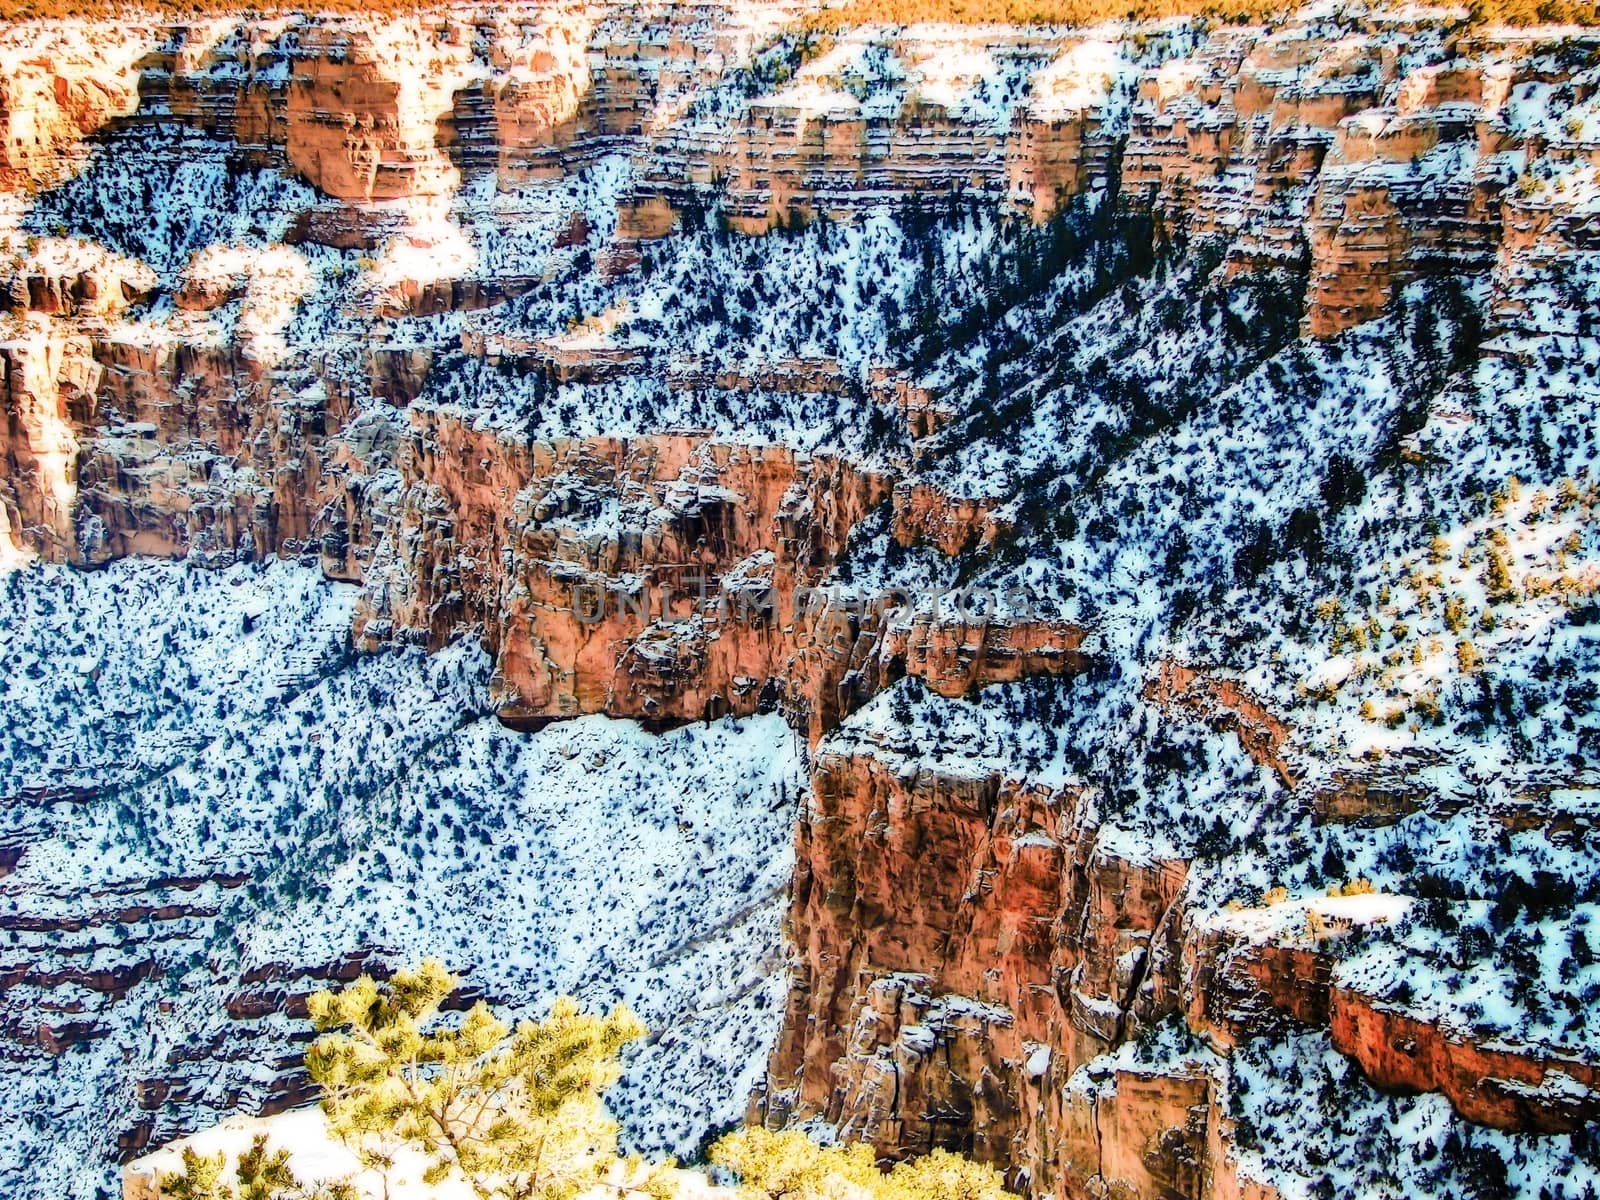 snow at Grand Canyon national park, USA in winter